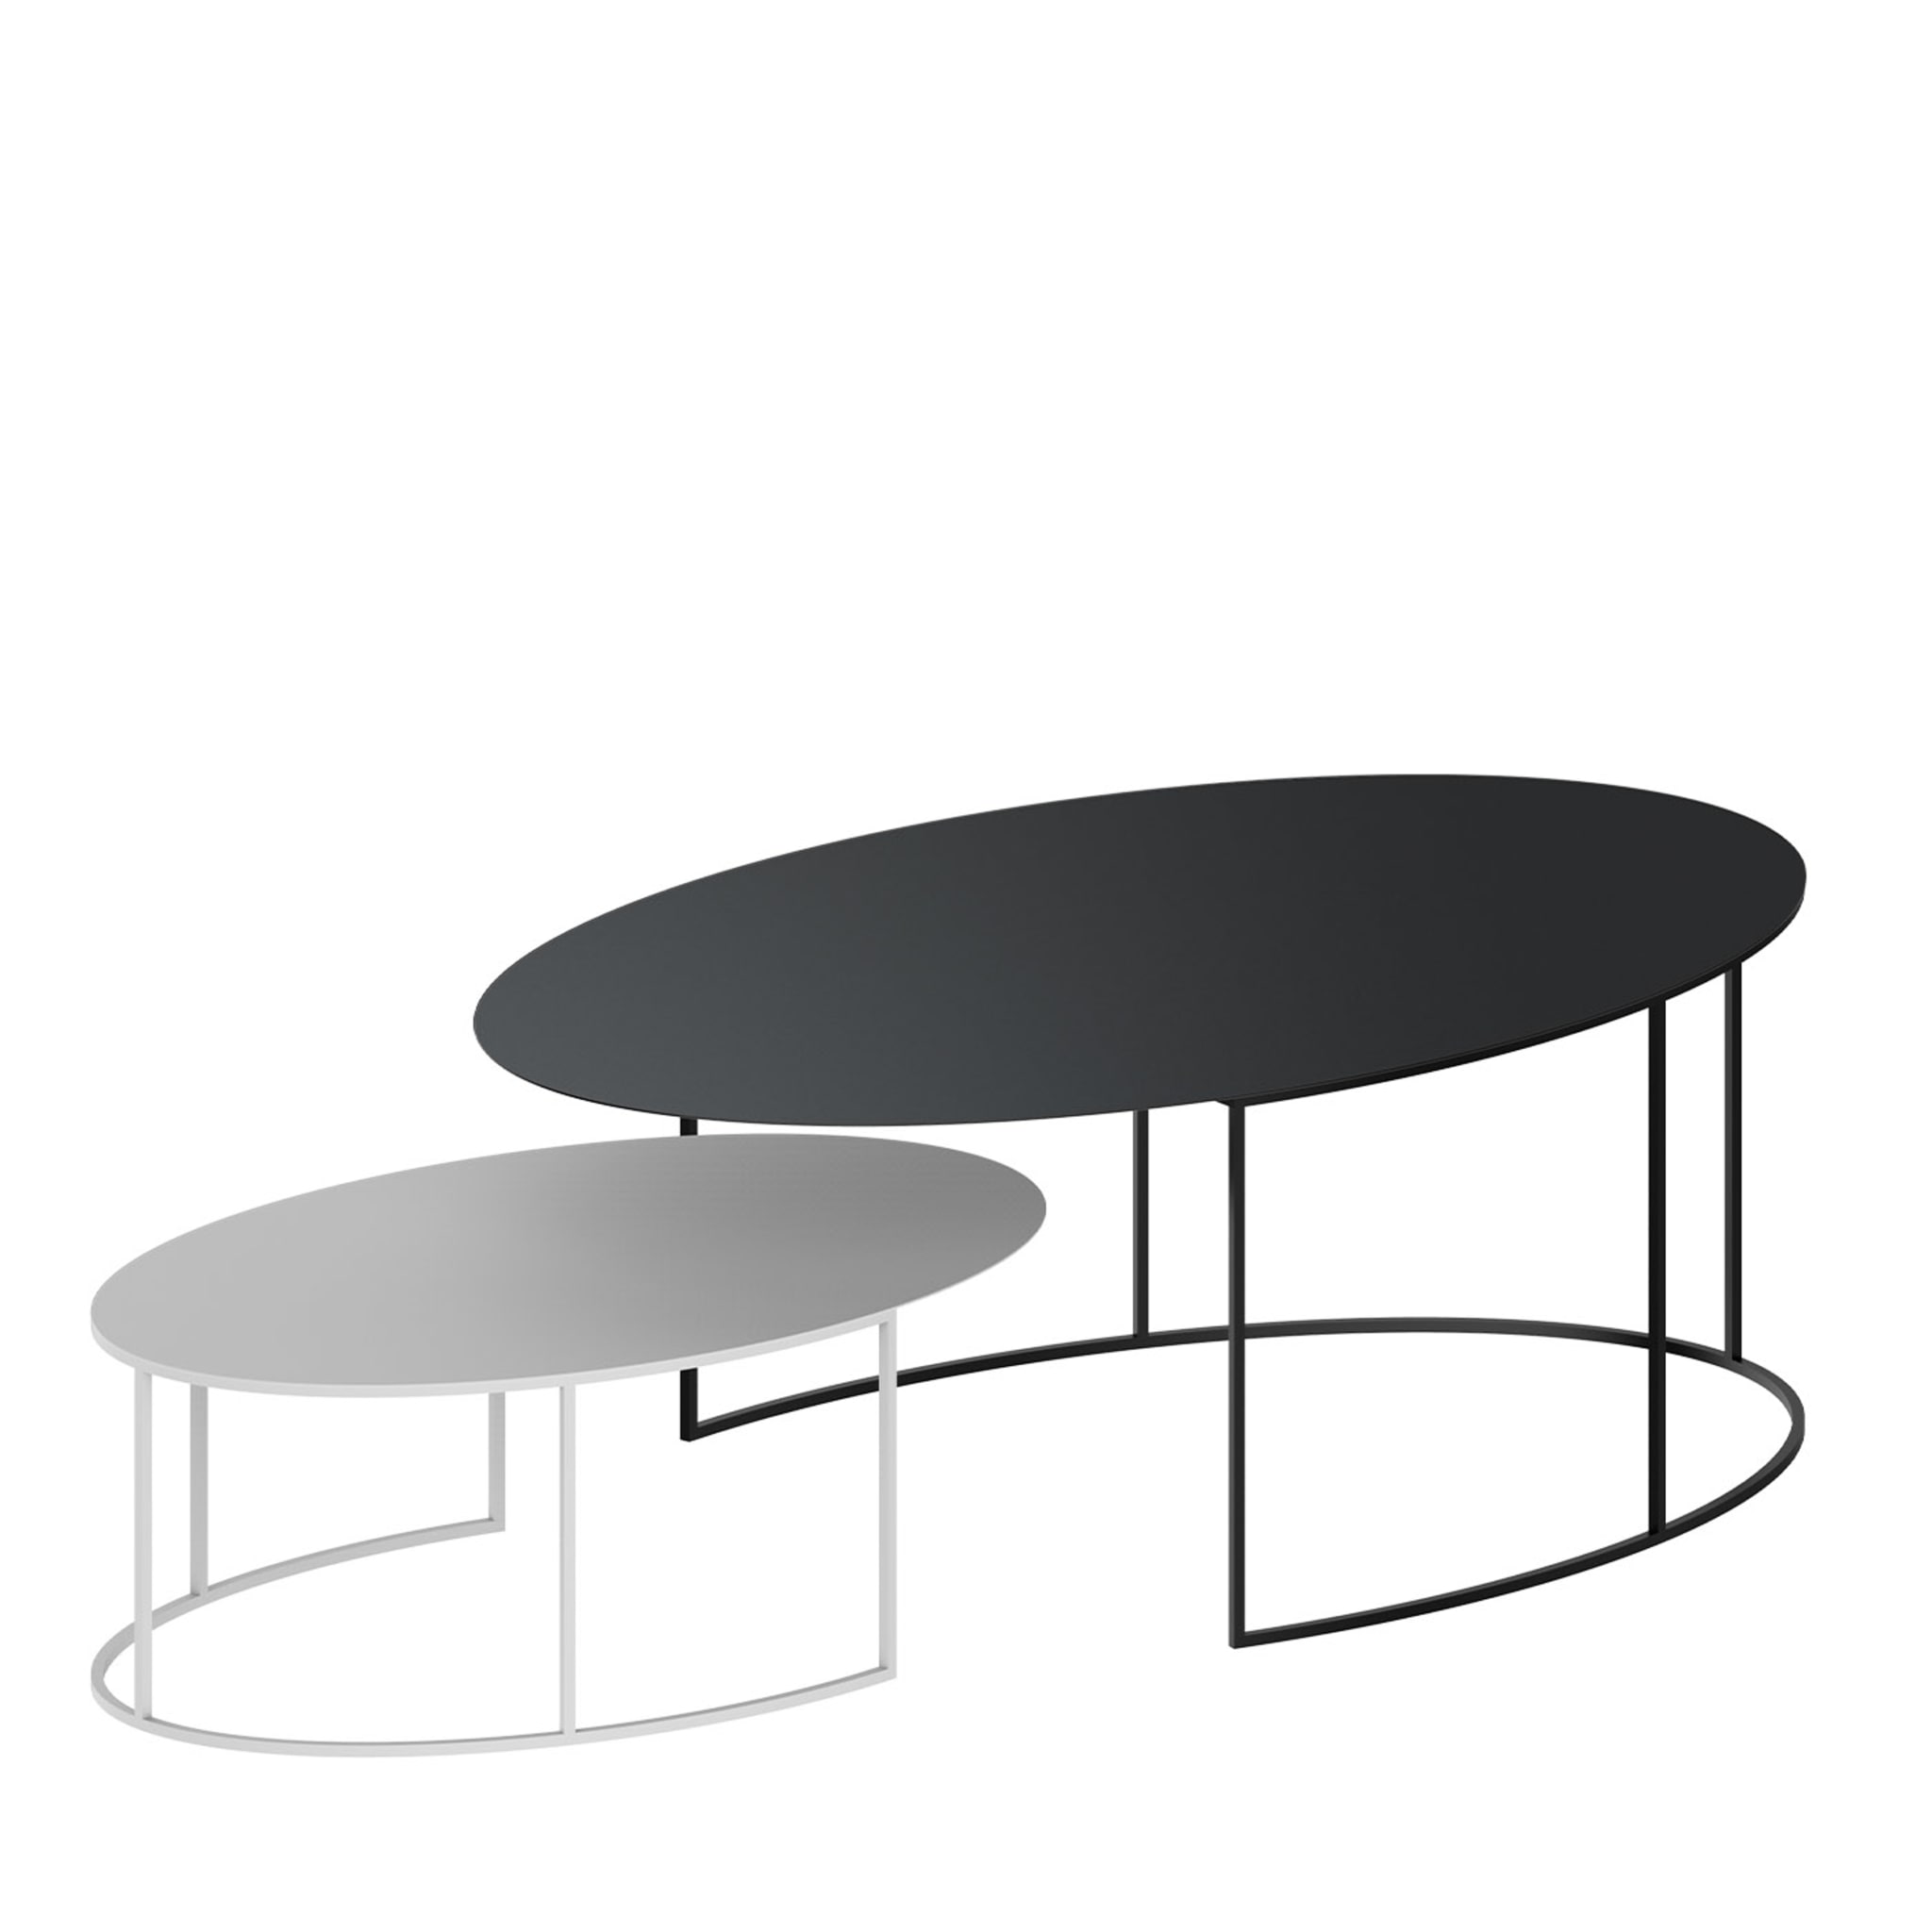 Slim Irony Oval Set of 2 Coffee Tables by Maurizio Peregalli - Main view